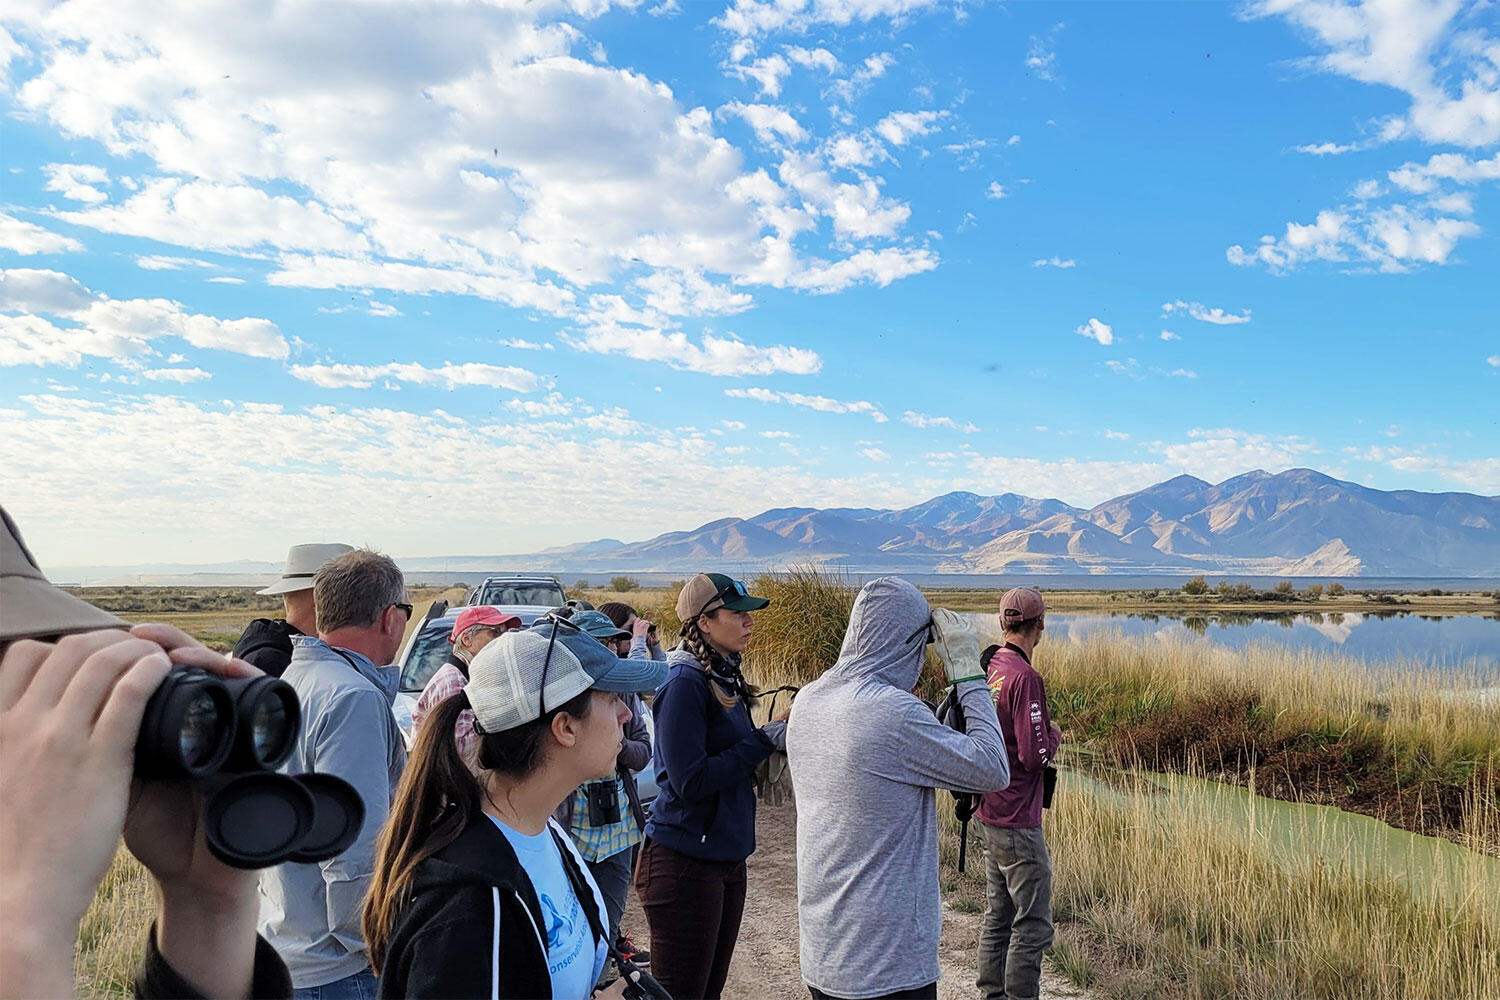 A group of adults look out over a lake with mountains in the distance. Some of them have binoculars.